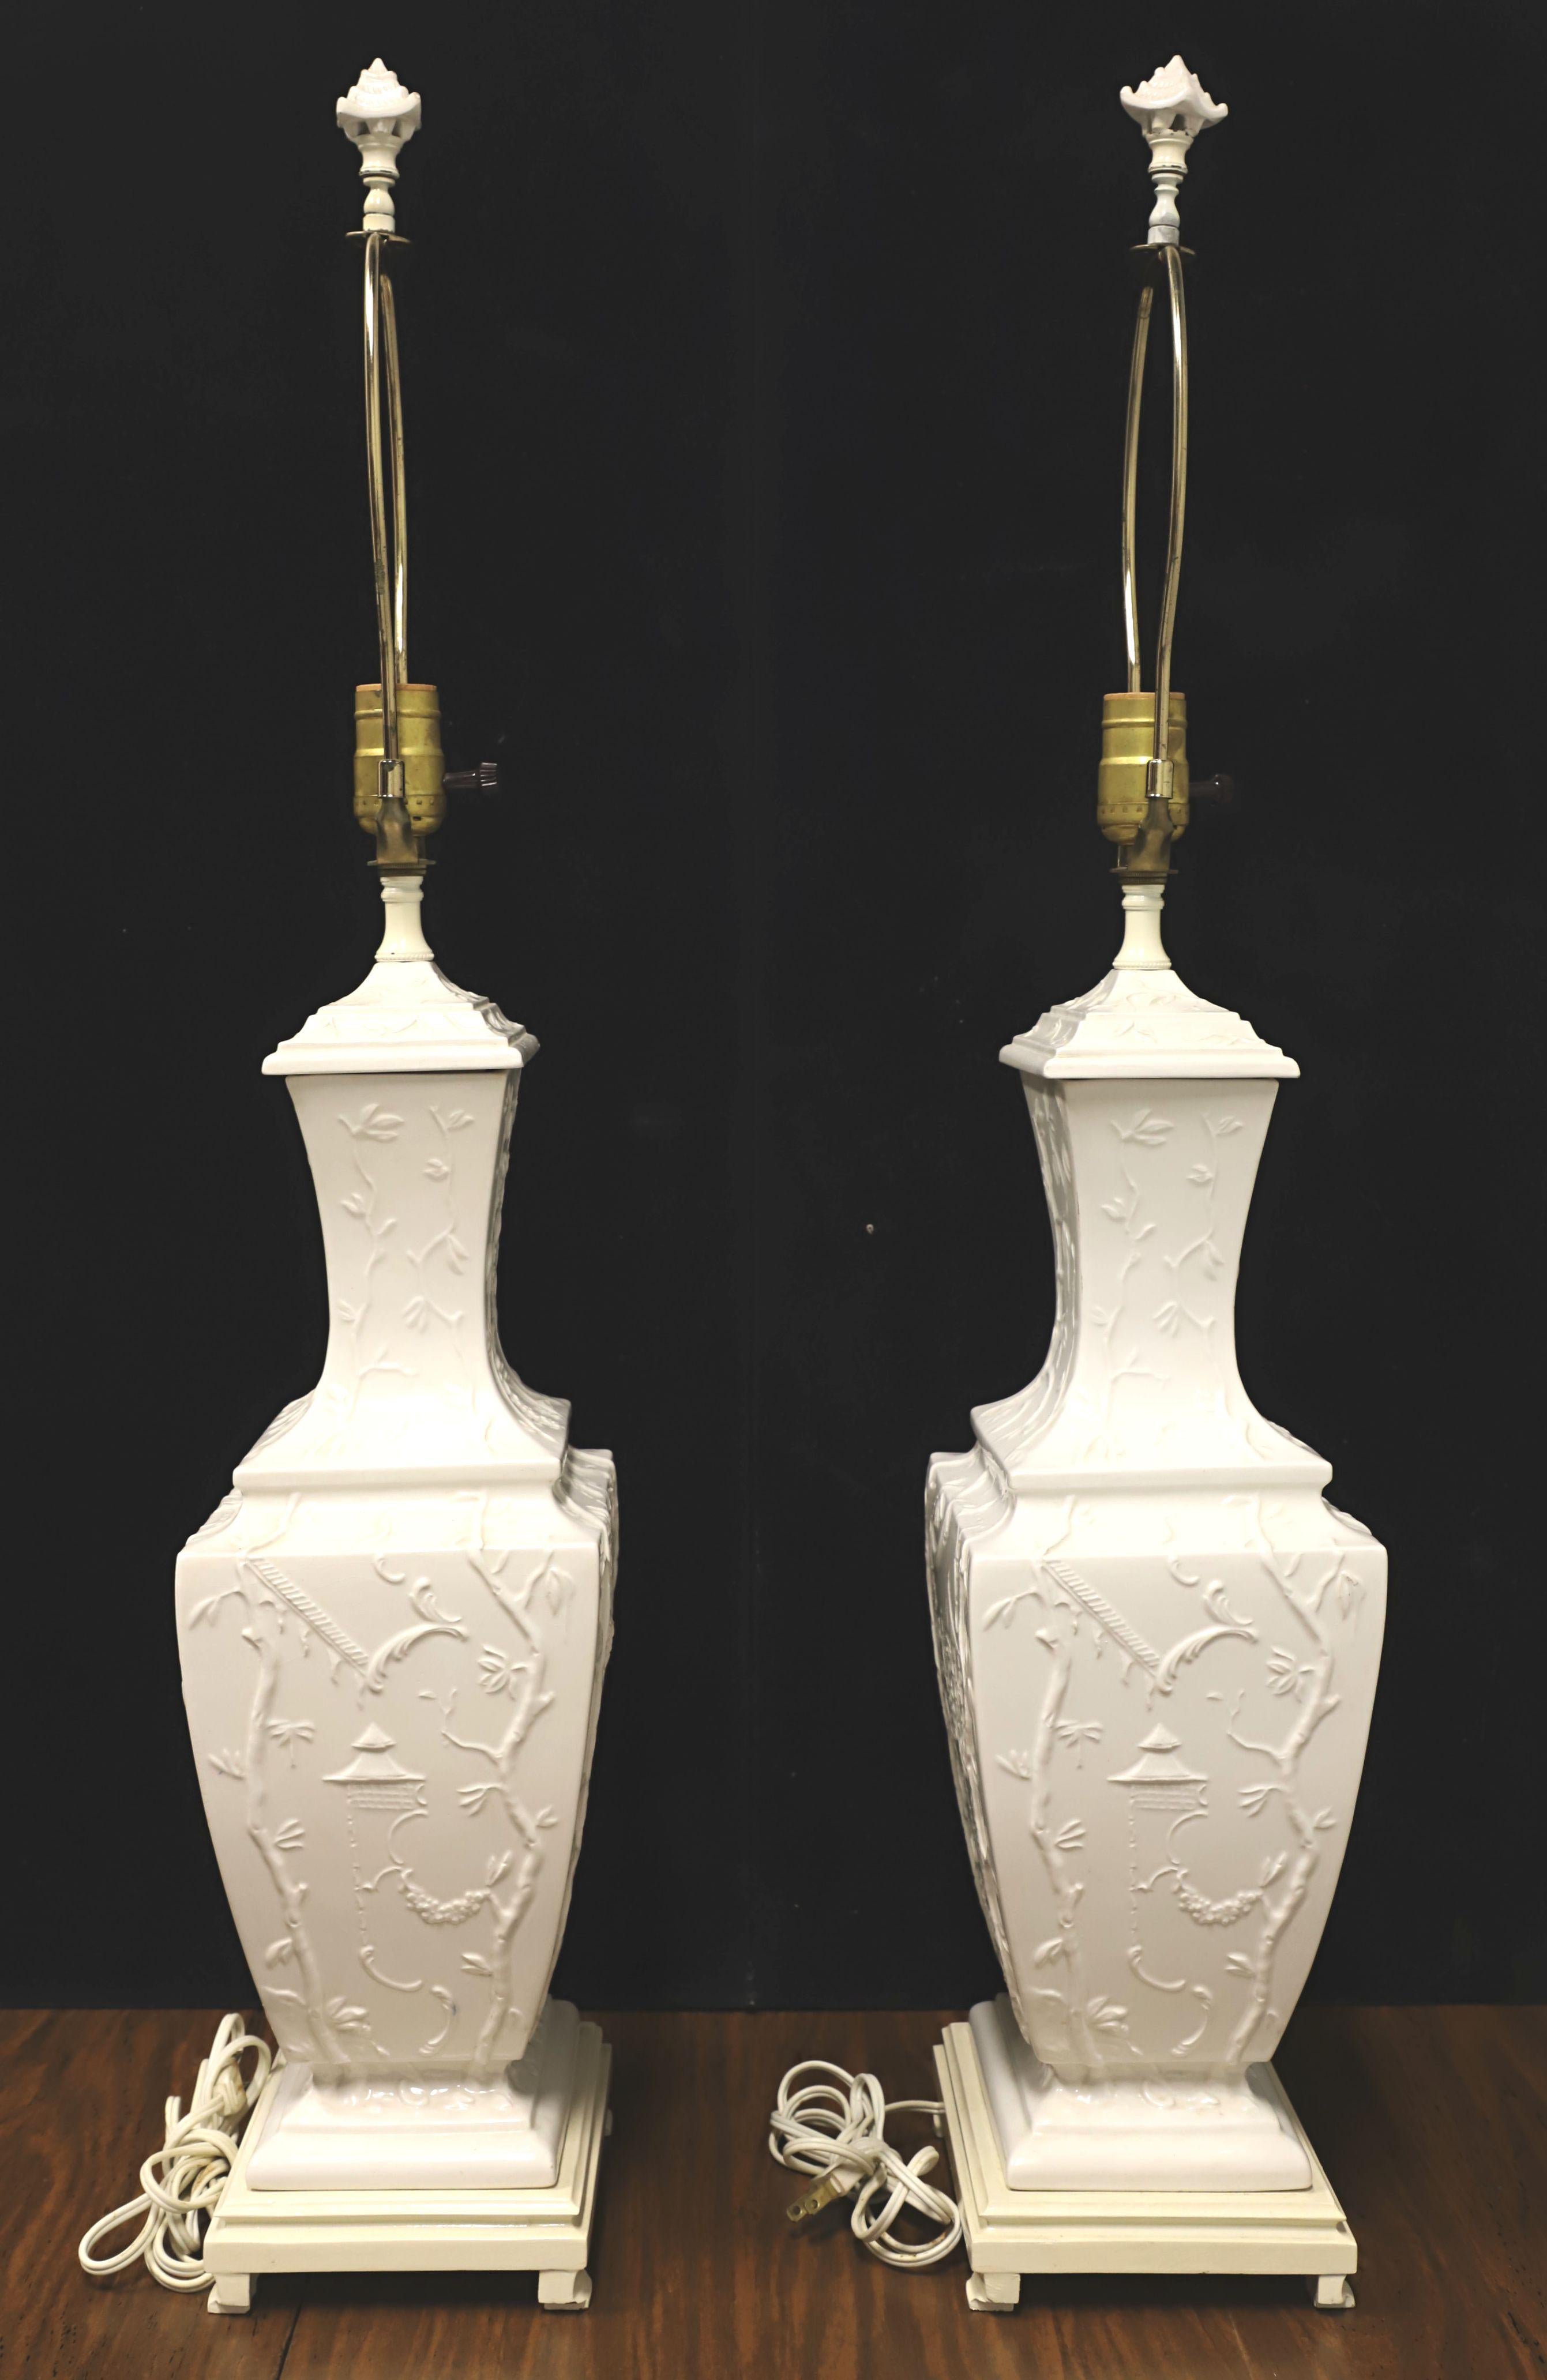 A pair of Asian Chinoiserie style table lamps, unbranded. Body is made of porcelain in an urn style, creamy white in color, raised floral Chinoiserie scene, and on a painted ceramic base. Has removable metal harps and decorative porcelain pagoda